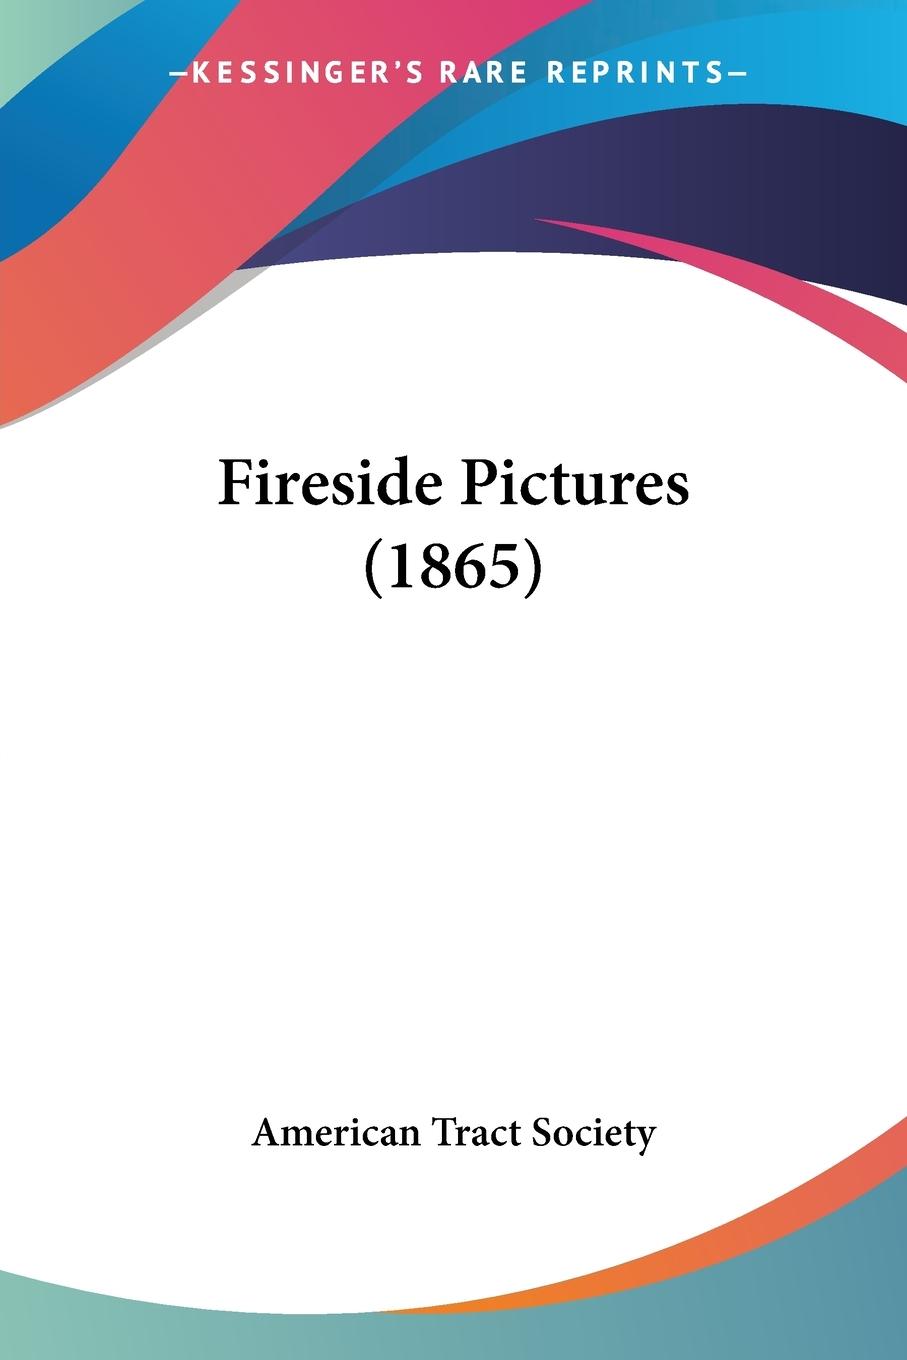 Fireside Pictures (1865) - American Tract Society